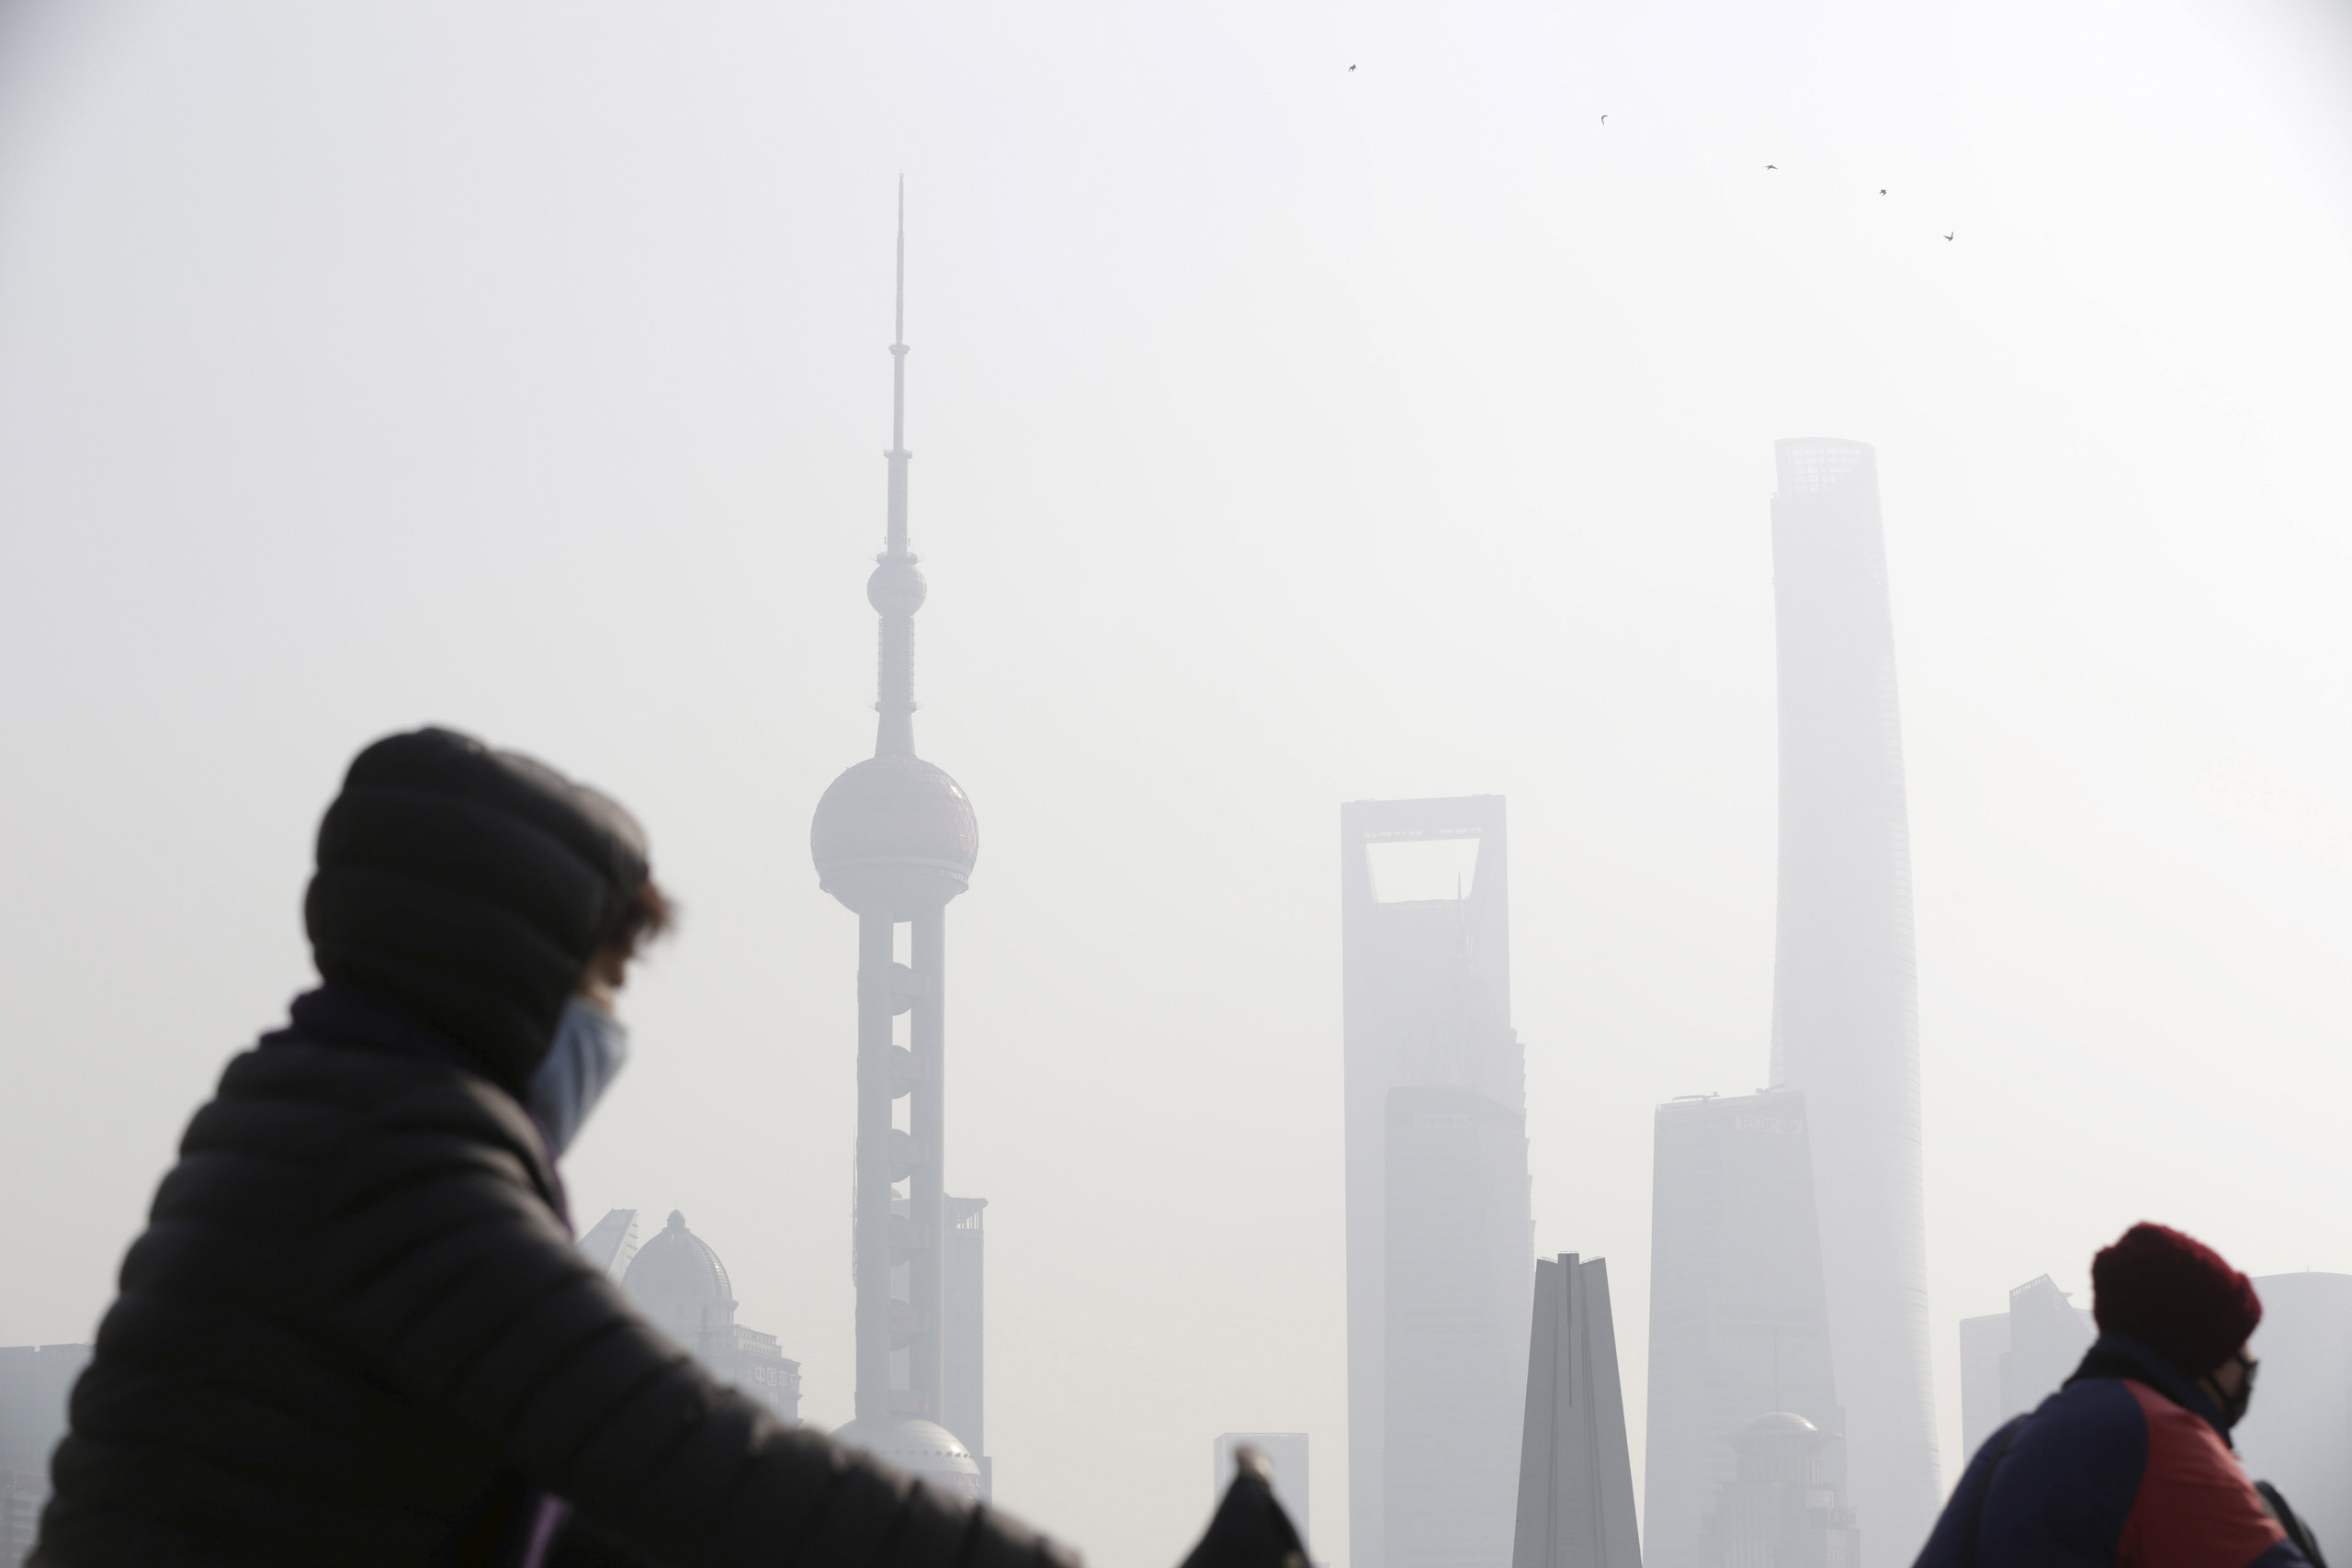 People wear protective masks near the Bund during a polluted day in Shanghai, China, January 19, 2016. Air pollution levels fell in most cities in China last year, environmental group Greenpeace said on Wednesday, but a humid and windless winter shrouded swaths of the country in choking smog, slowing improvement in the second half. Picture taken January 19, 2016. REUTERS/Aly Song      TPX IMAGES OF THE DAY      - RTX23563